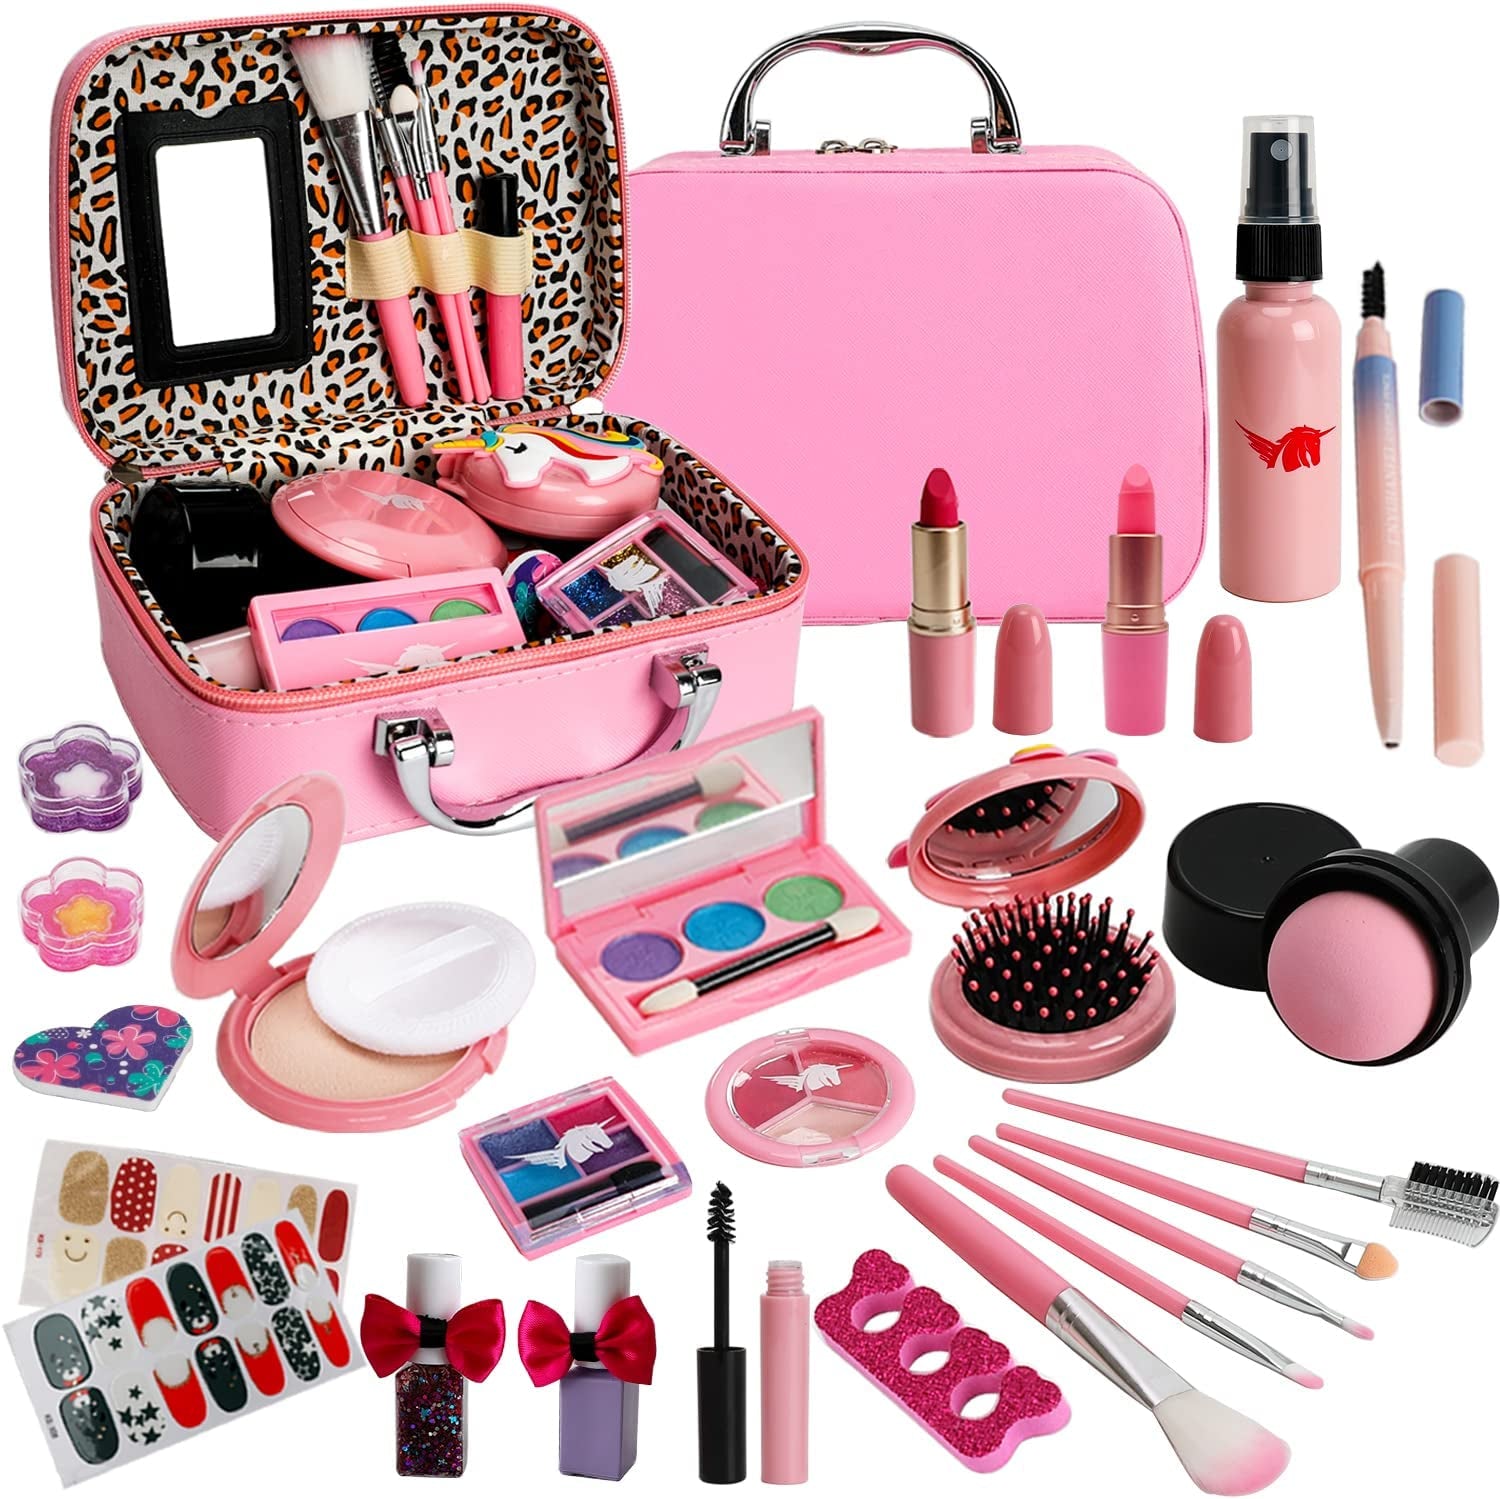 Deluxe Washable Makeup Kit for Kids - Genuine Cosmetic Set for Girls, Little Girl's Makeup Collection for Toddlers and Young Princesses, Gifts for Girls Ages 4-10